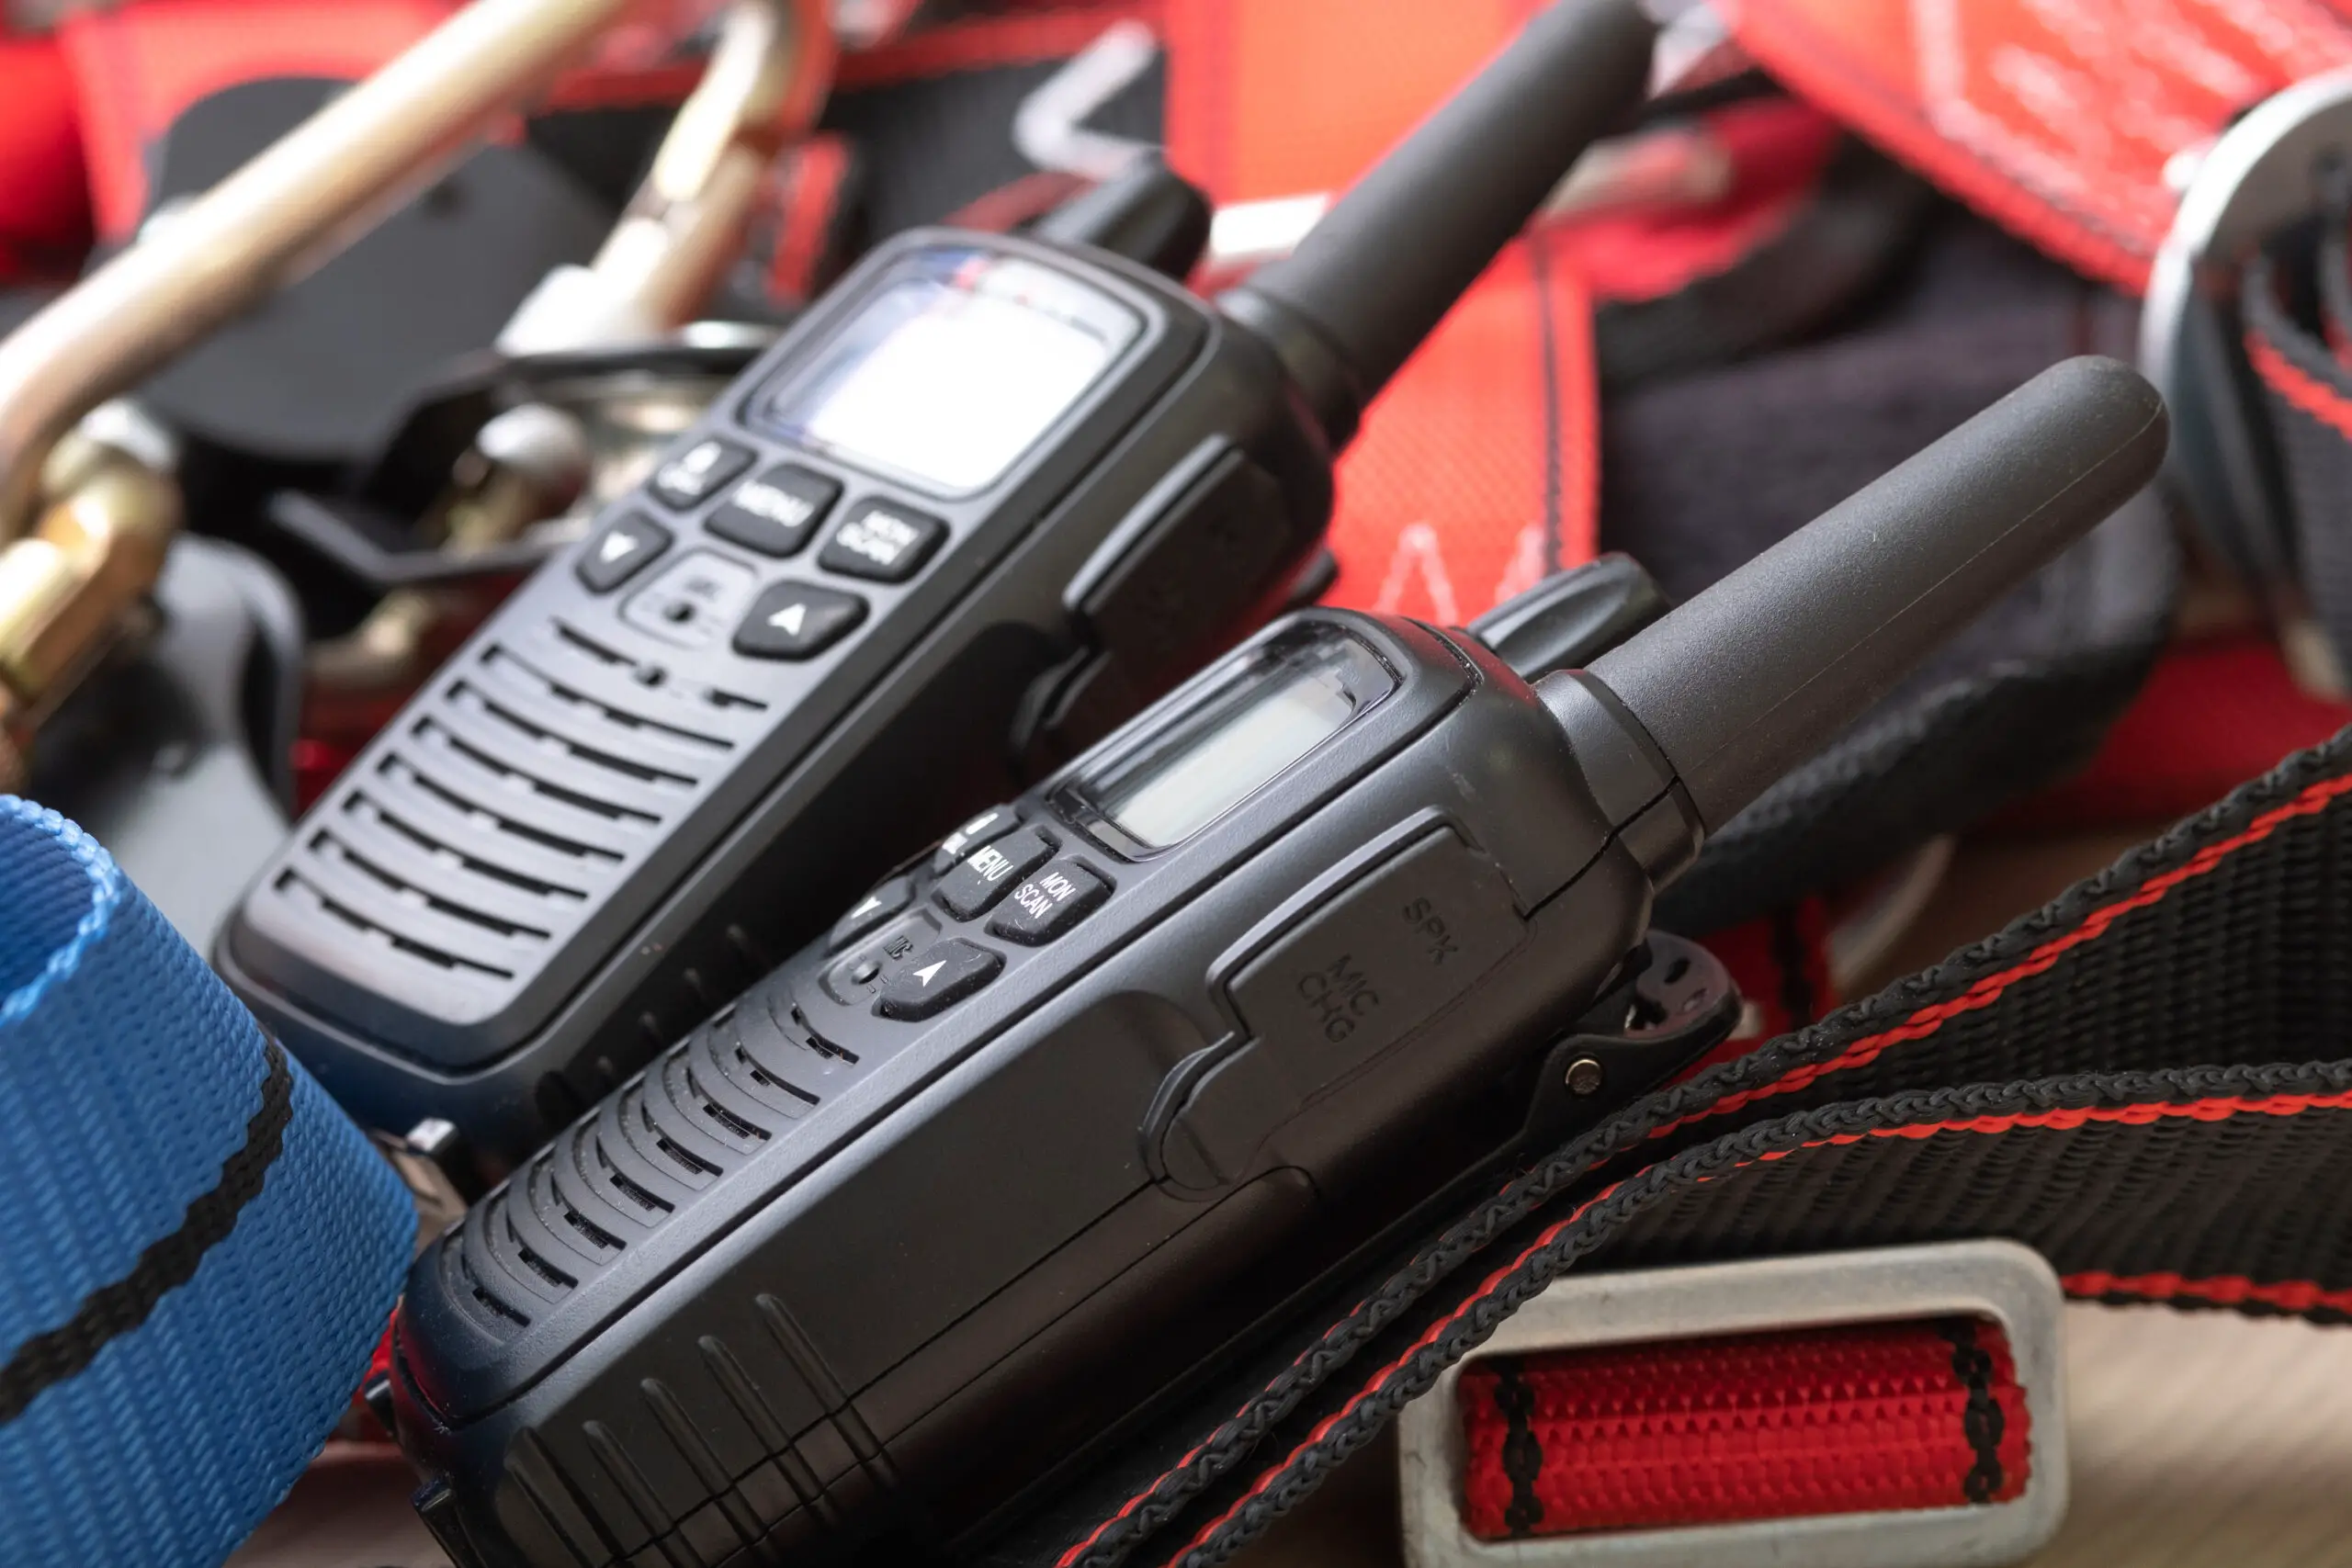 two radios and gear for climbers, rescue workers, red ropes and connection